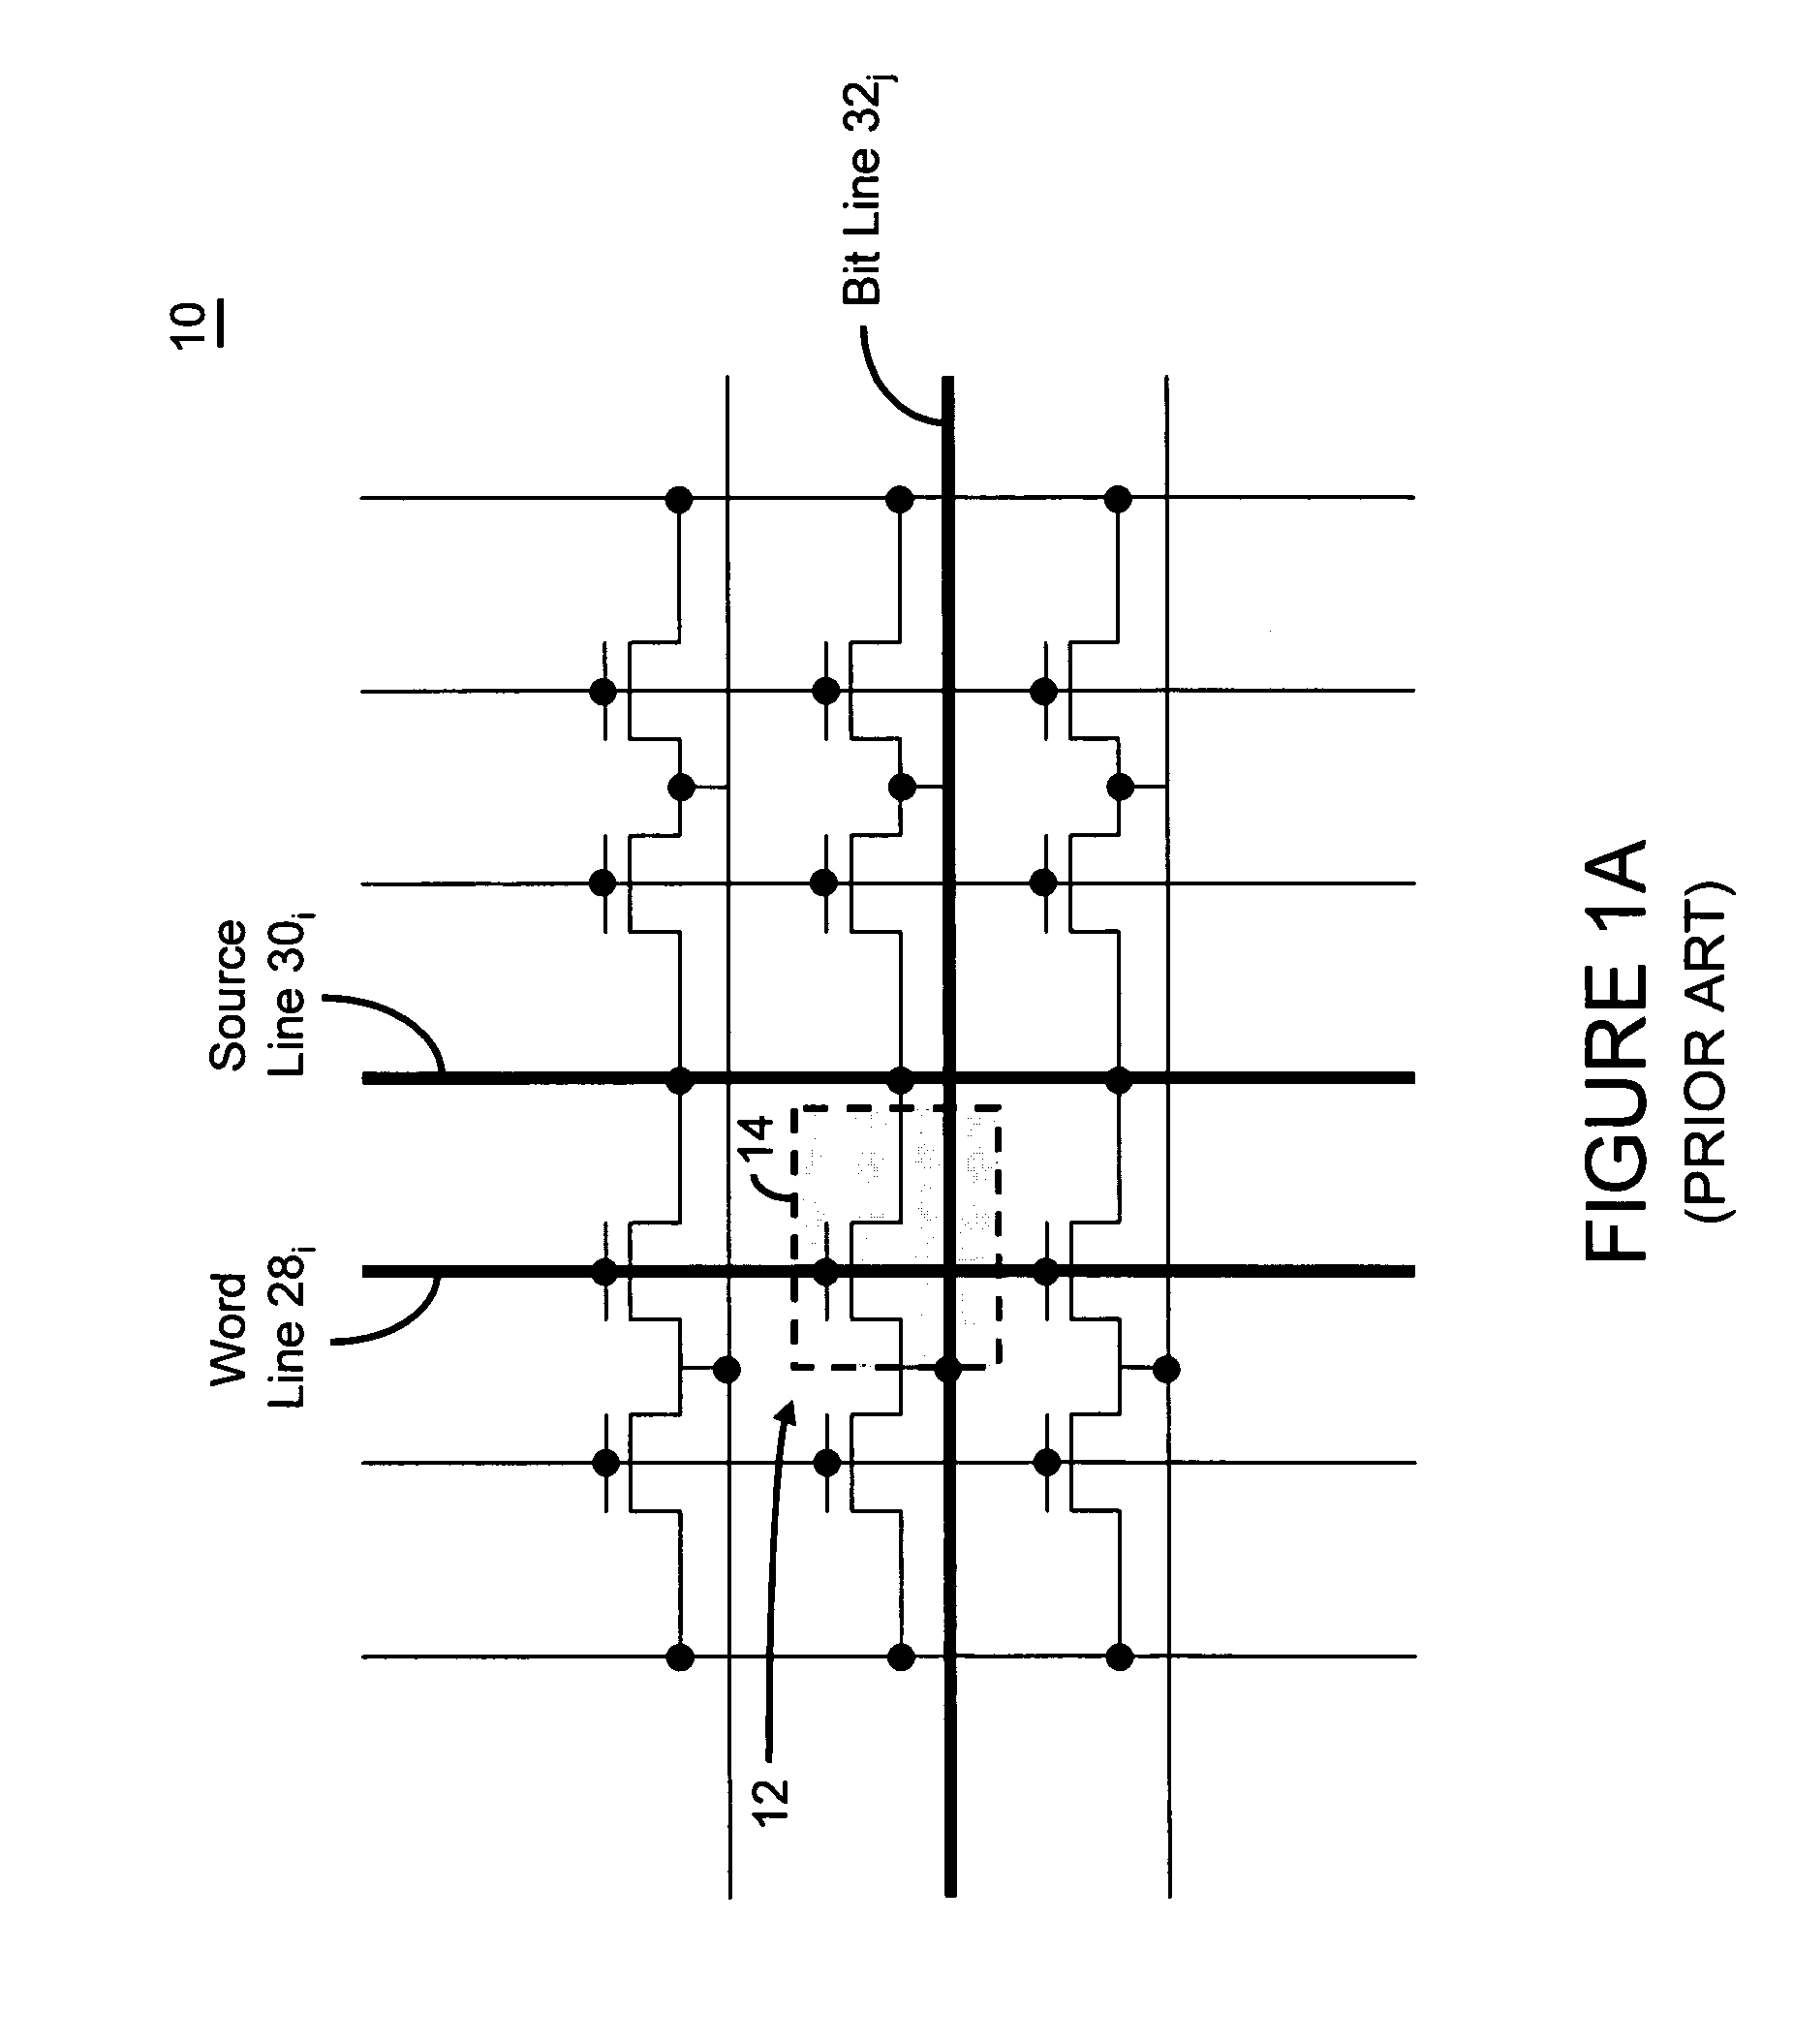 Bipolar reading technique for a memory cell having an electrically floating body transistor